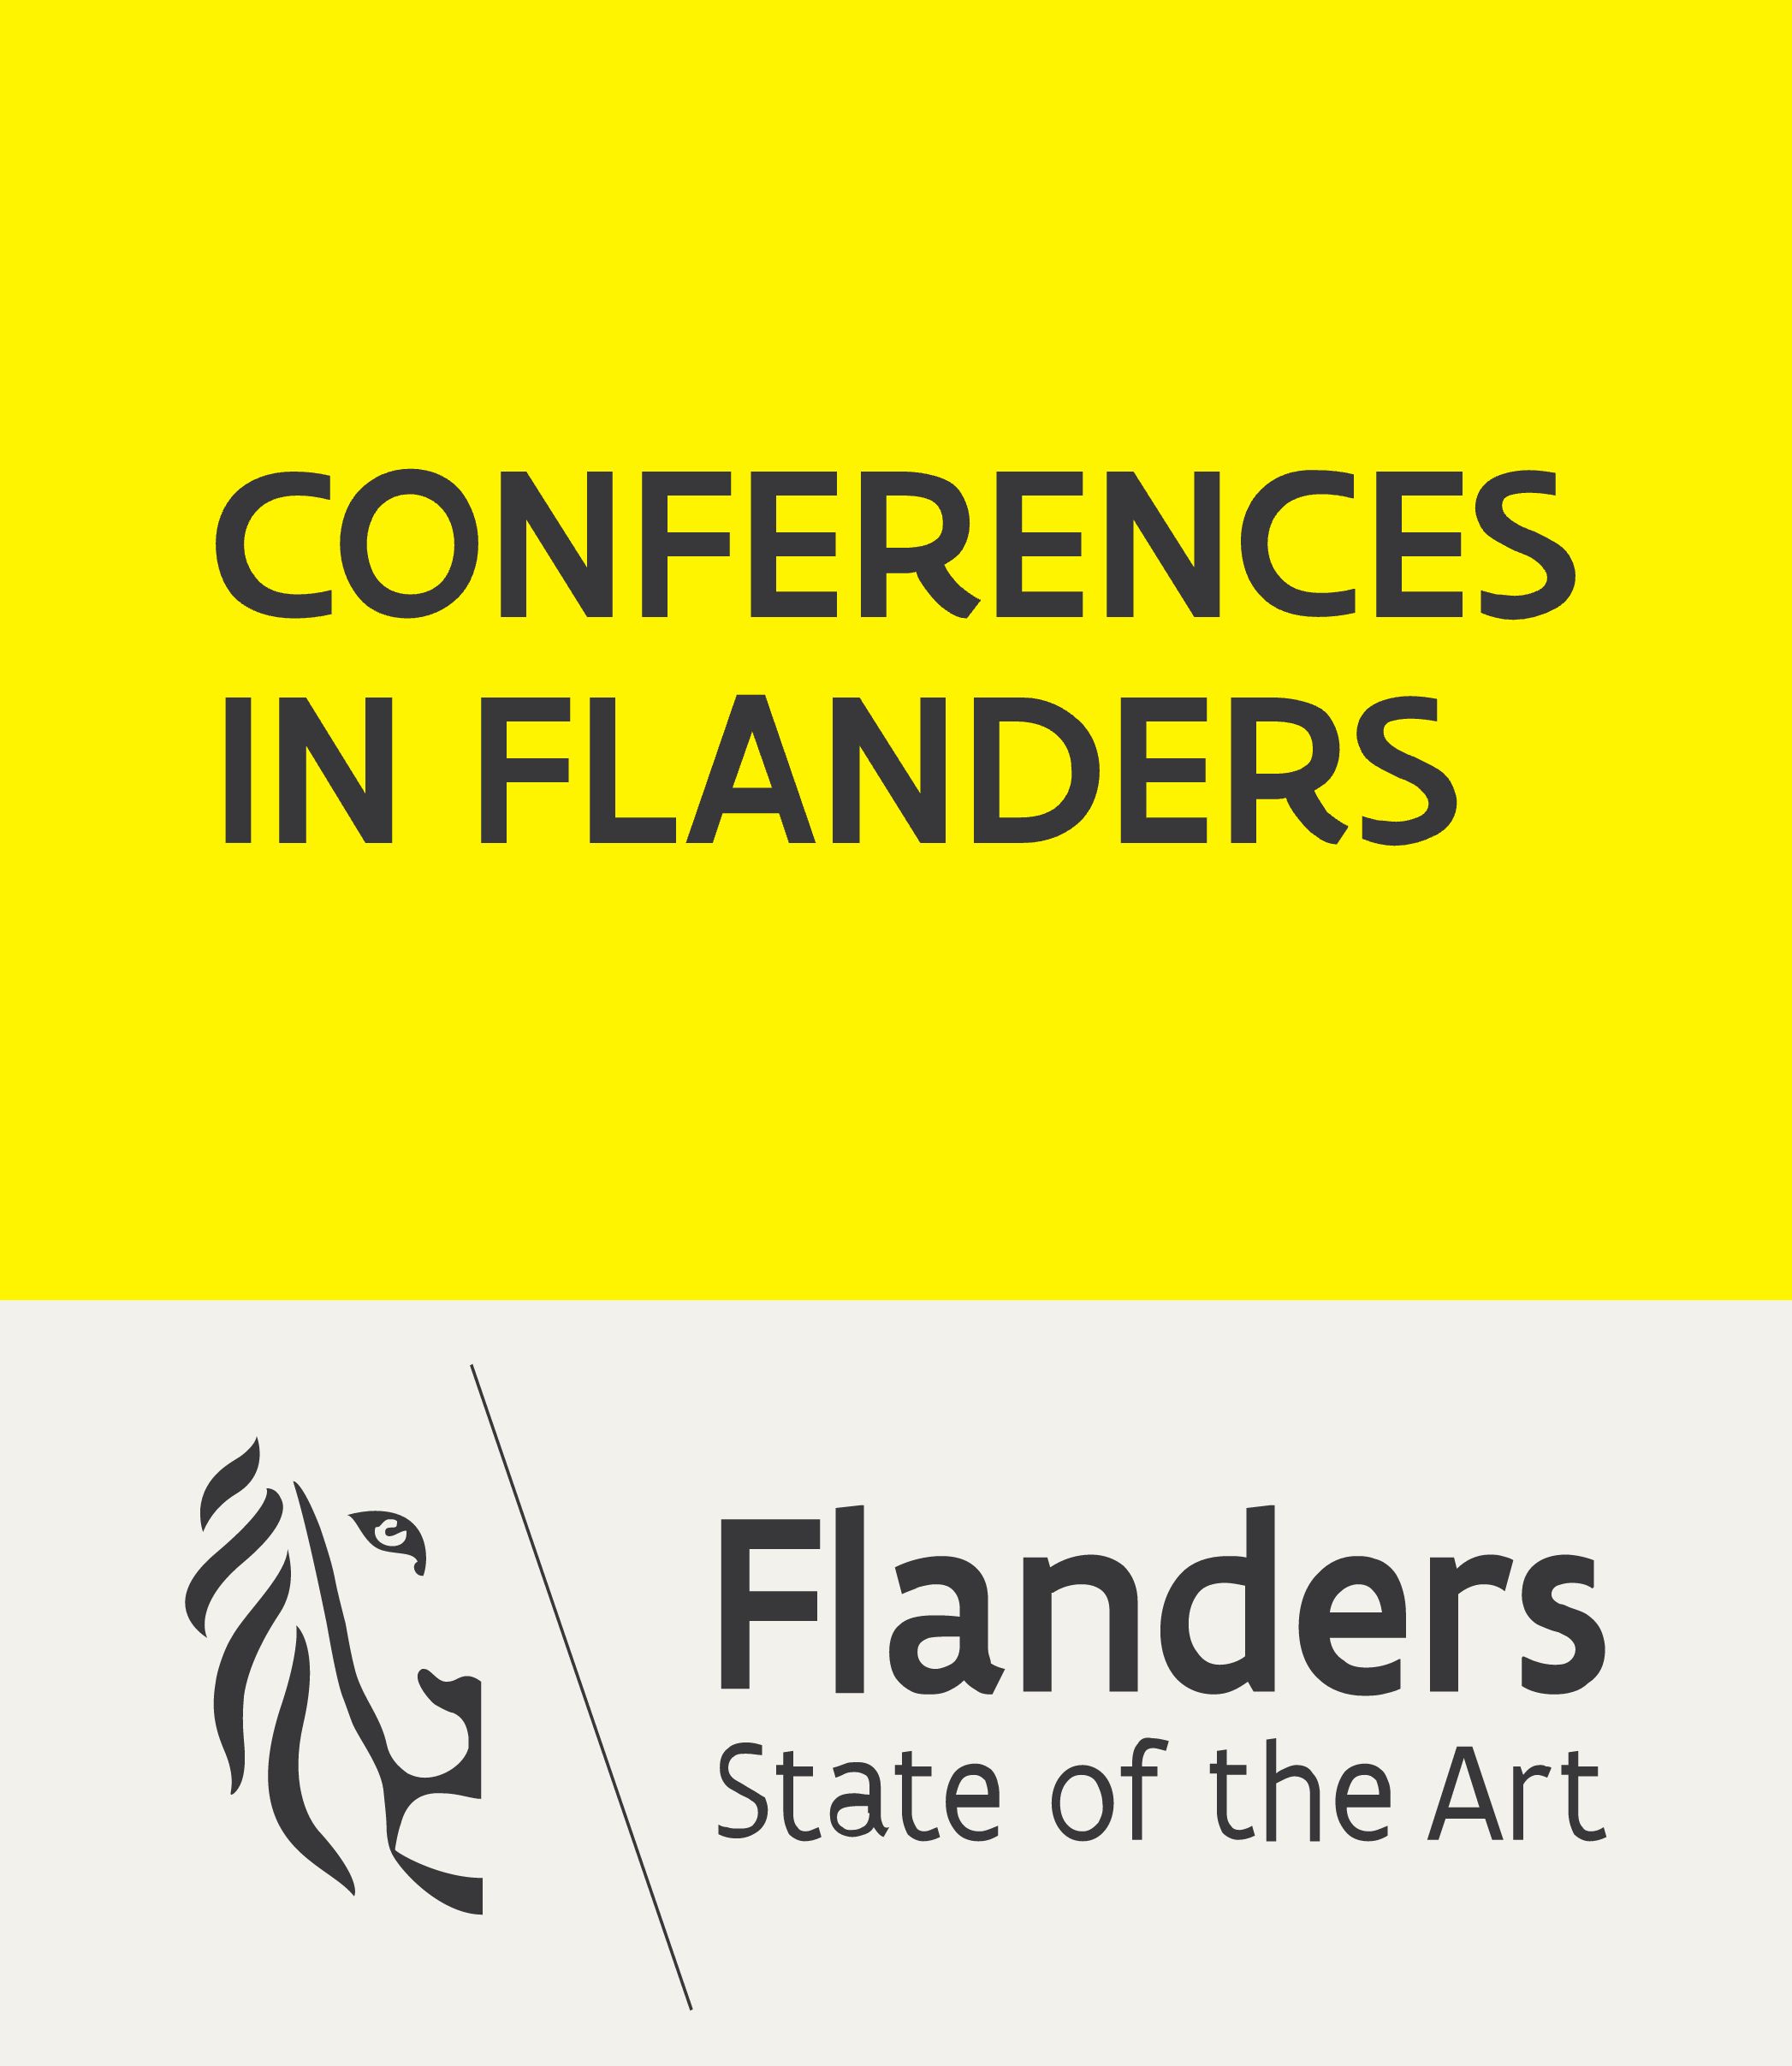 Conference in Flanders / Flanders state of art logo